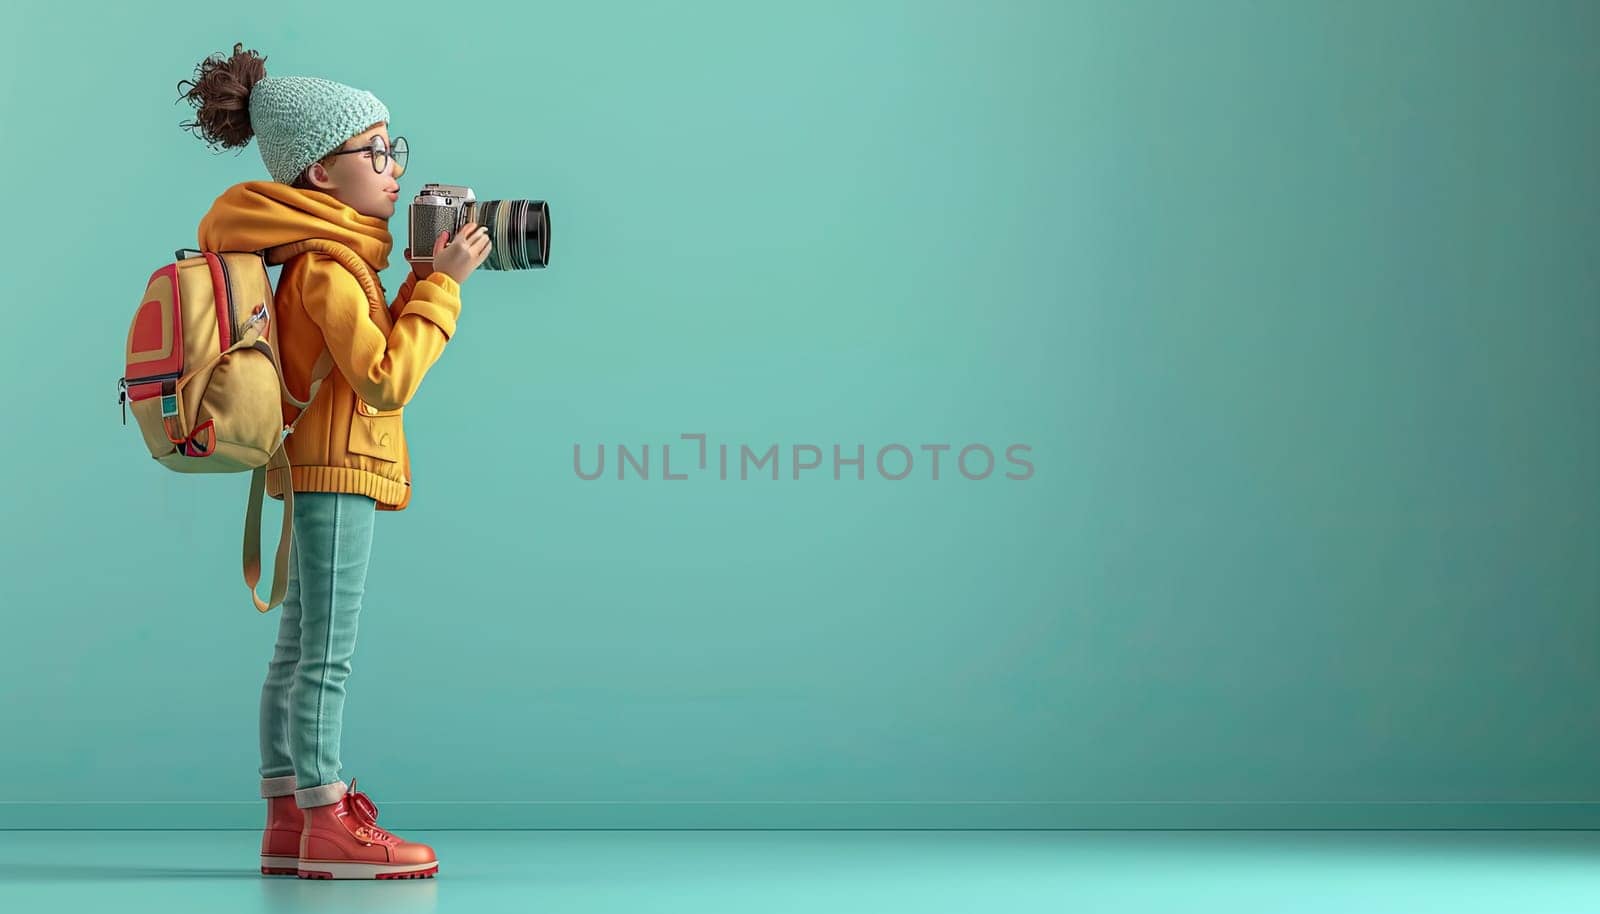 A young girl wearing a yellow jacket and a hat is holding a camera by AI generated image.